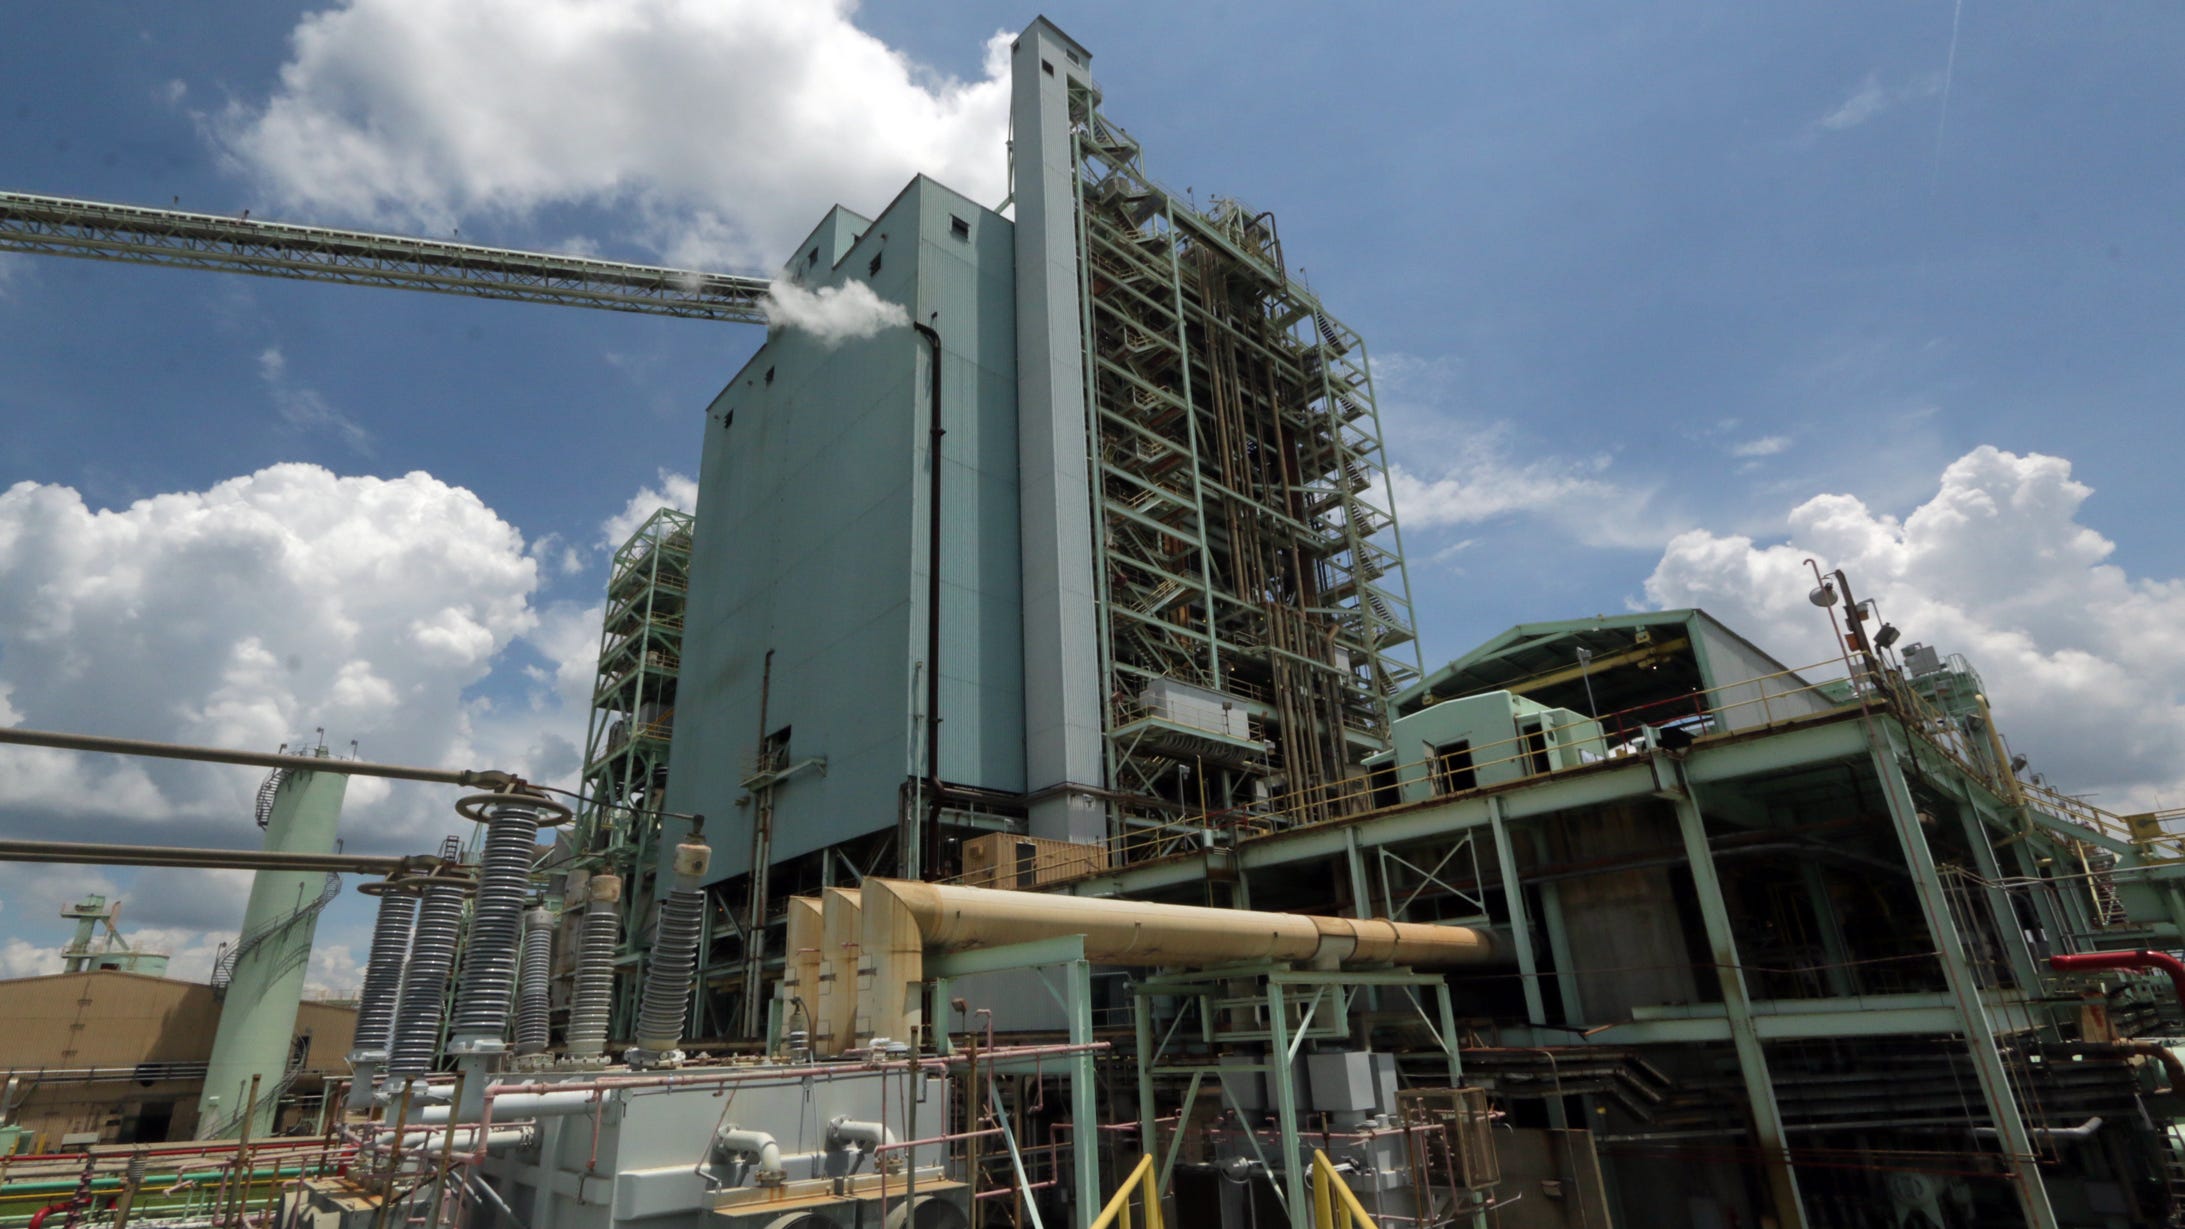 lakeland-electric-s-mcintosh-power-plants-are-now-being-demolished